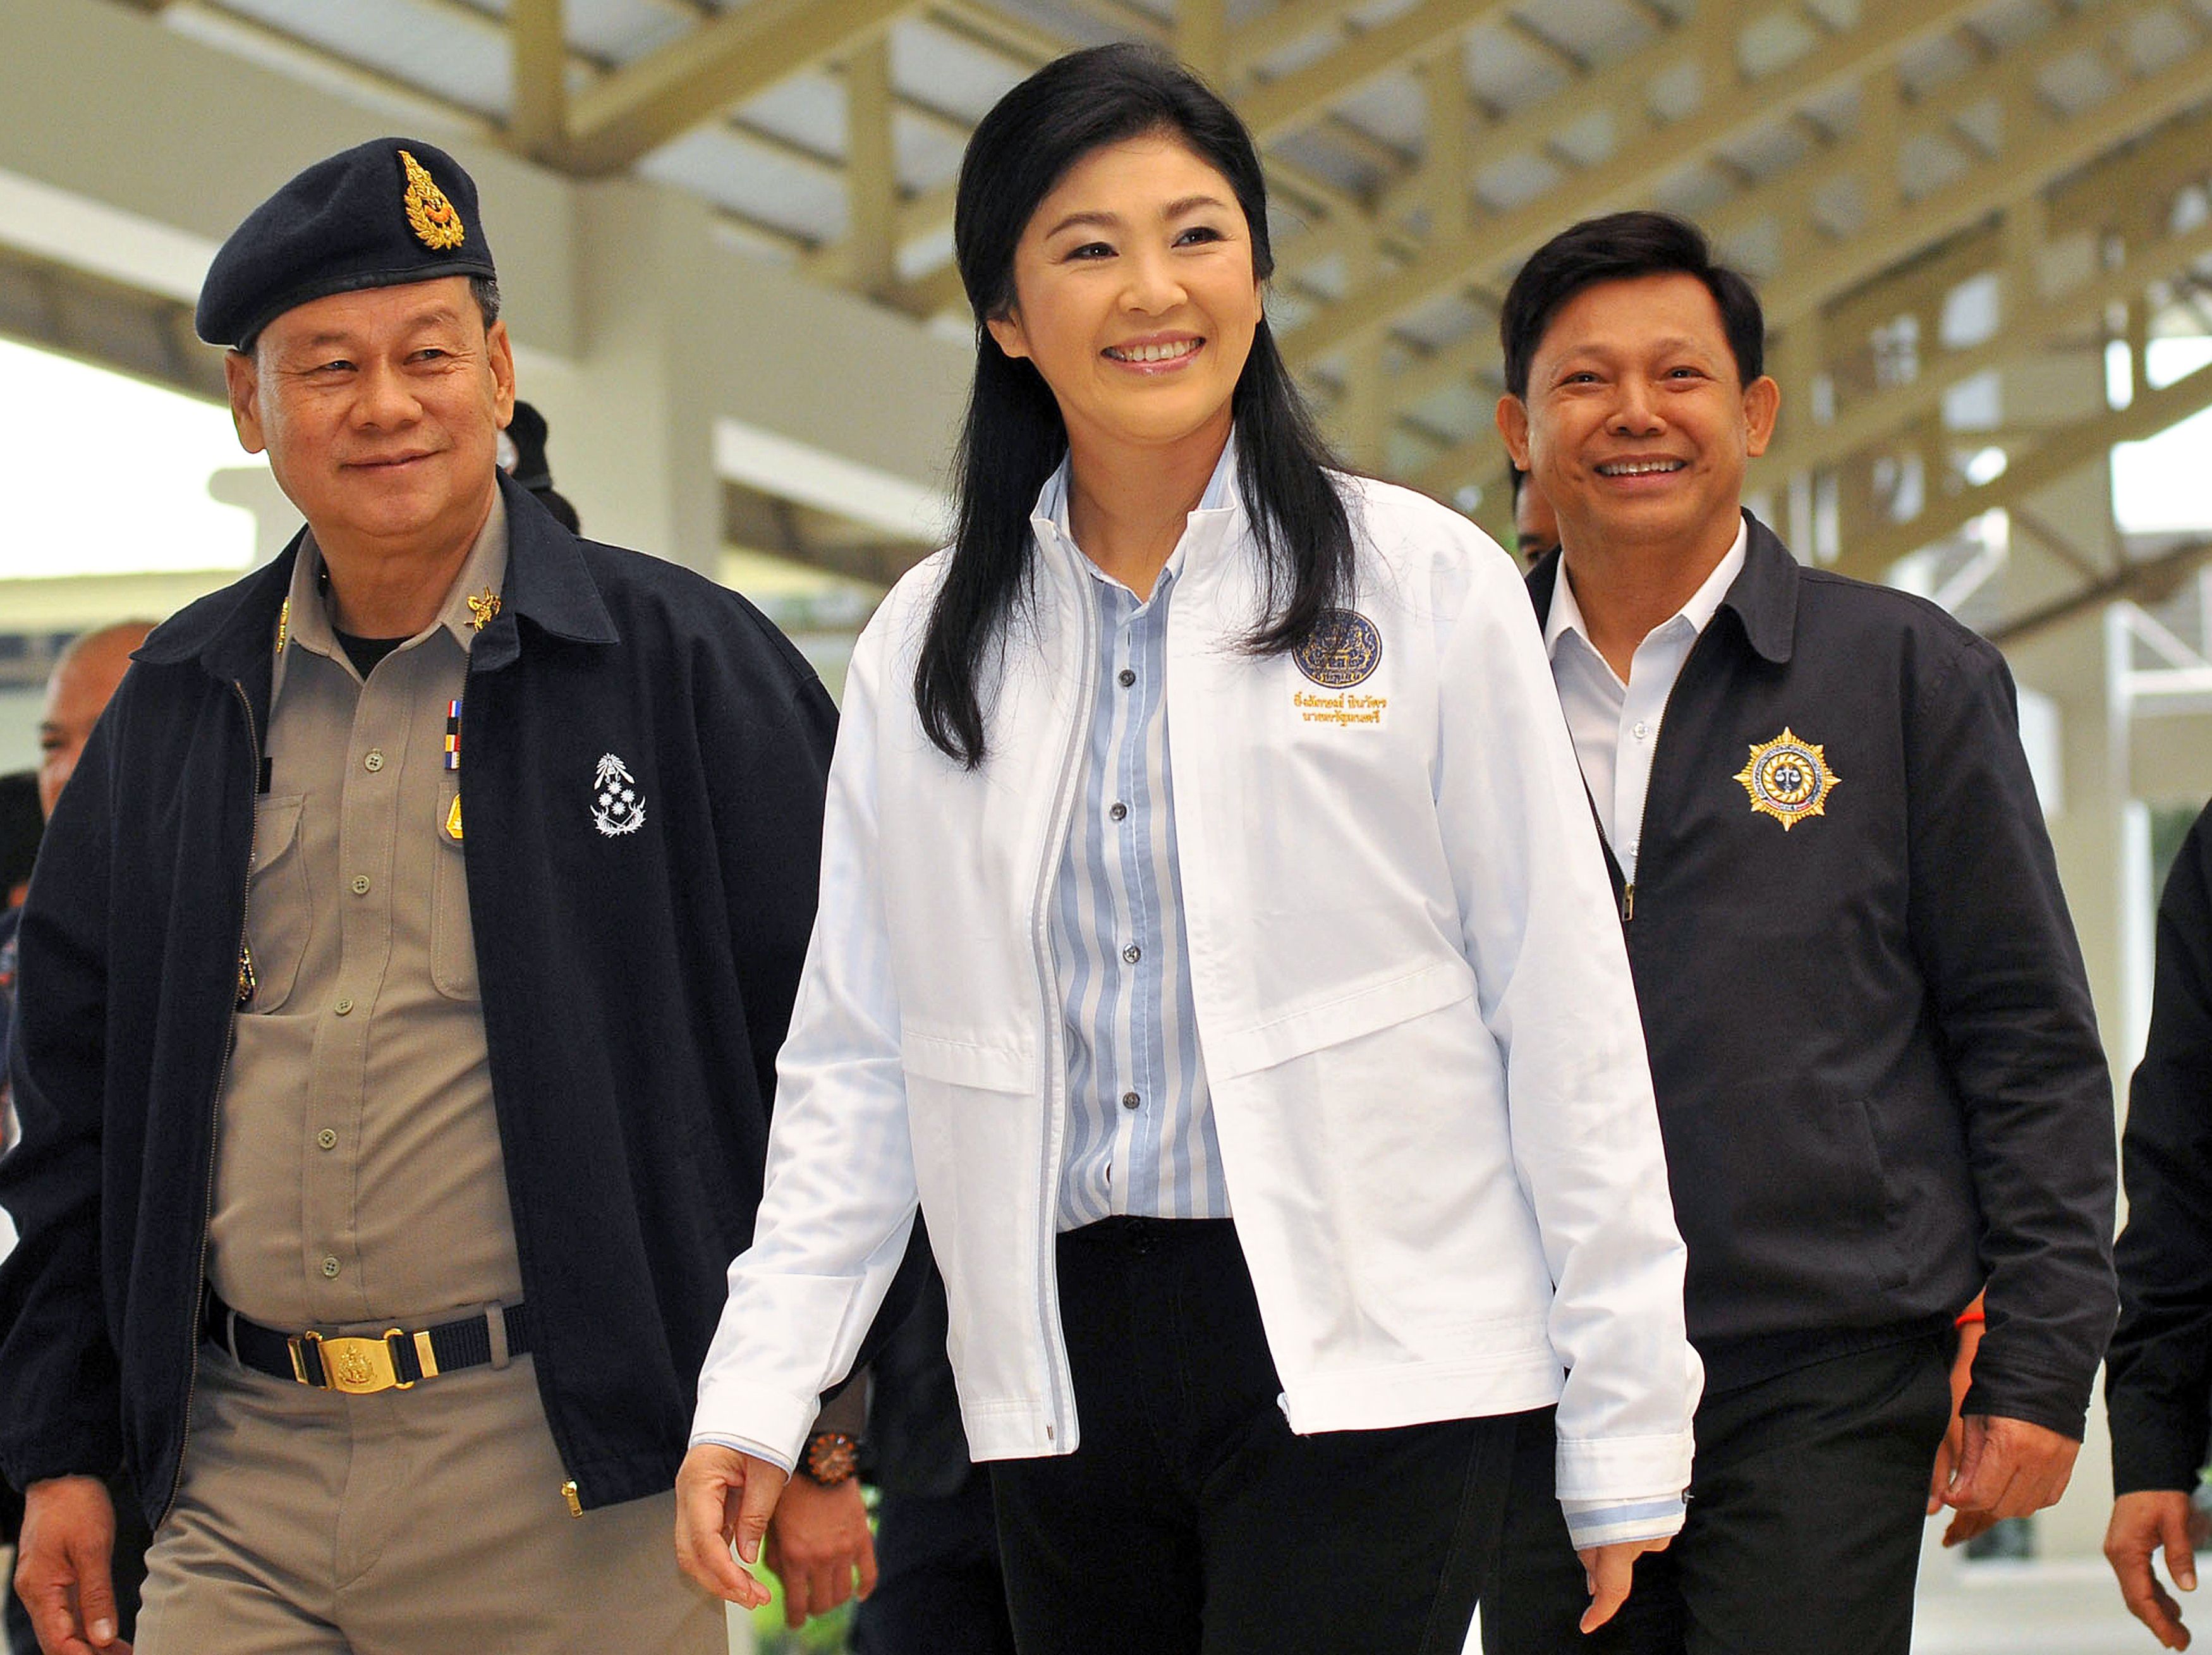 Thailand's Prime Minister Yingluck Shinawatra in Chiang Mai province on Friday. Photo: AFP